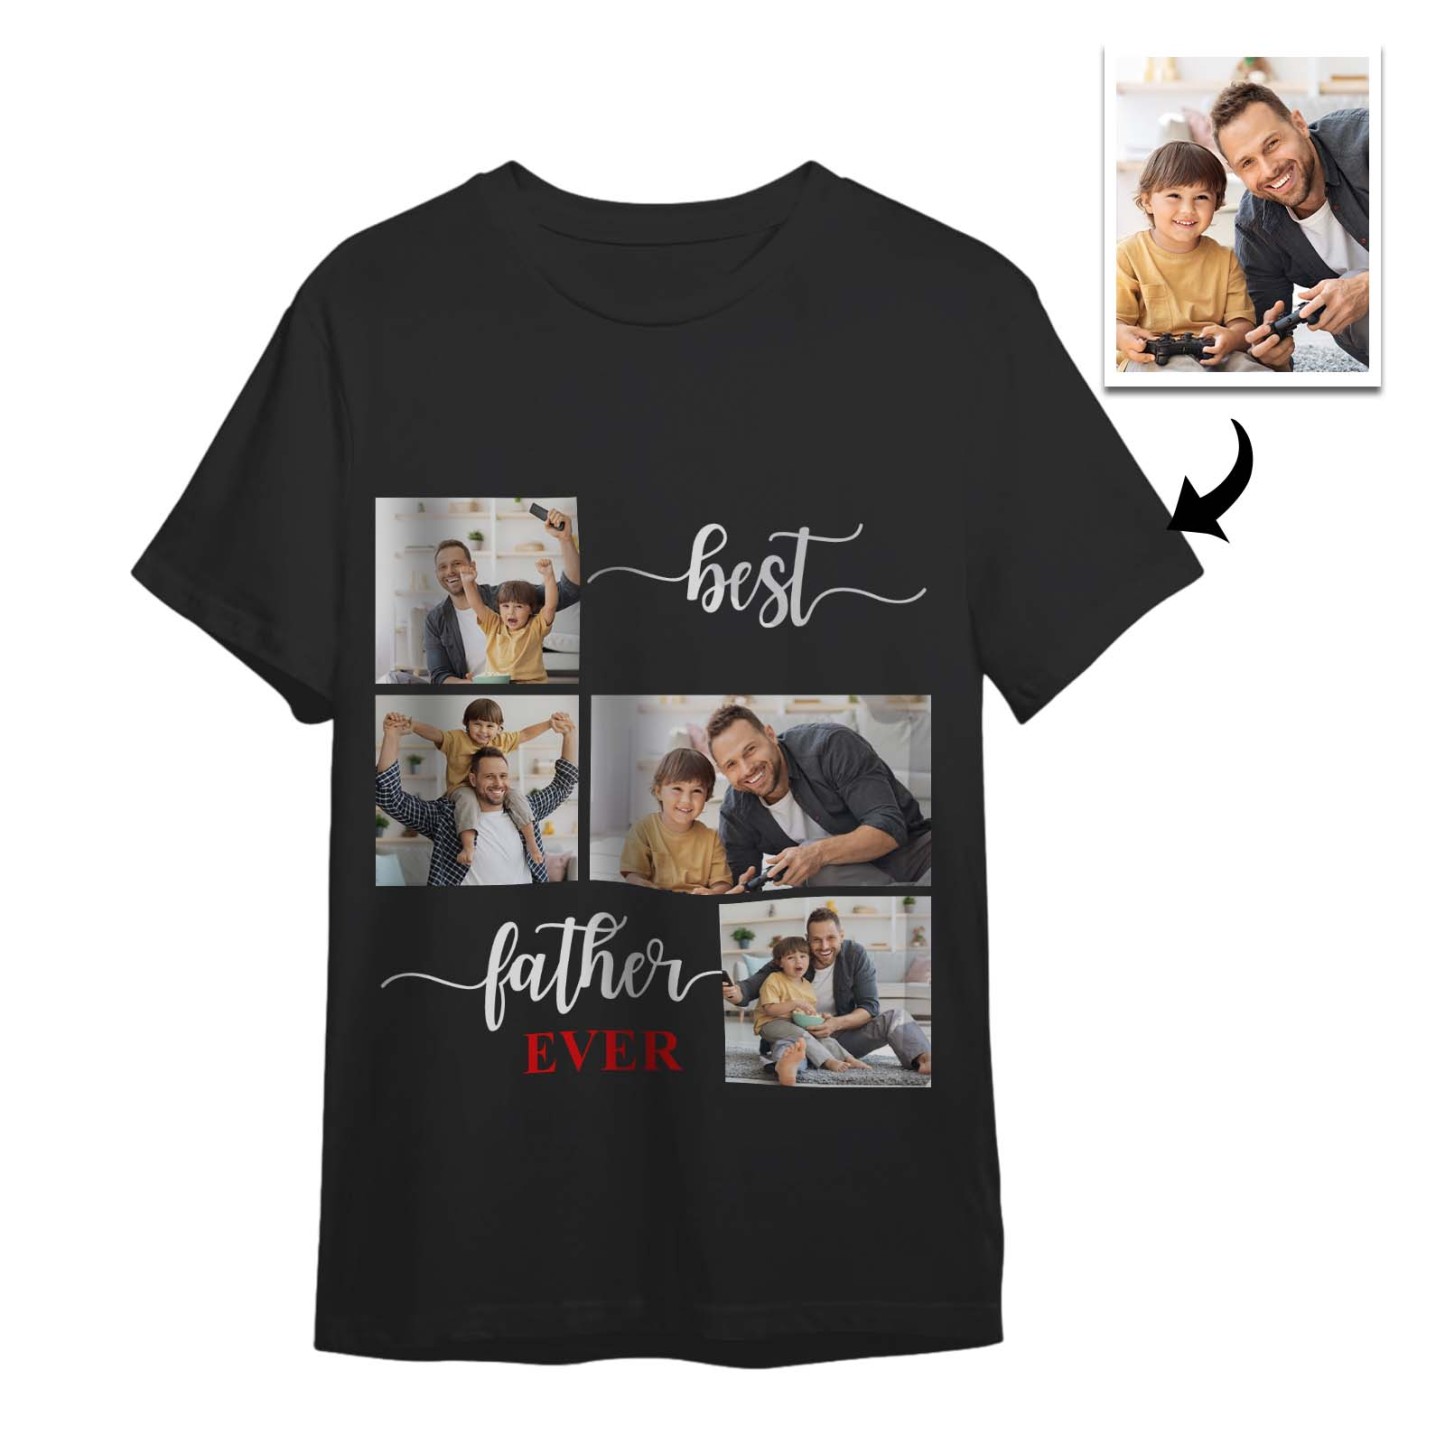 custom-t-shirt-personalized-photo-t-shirt-best-father-ever-fathers-day-gift-family-t-shirt